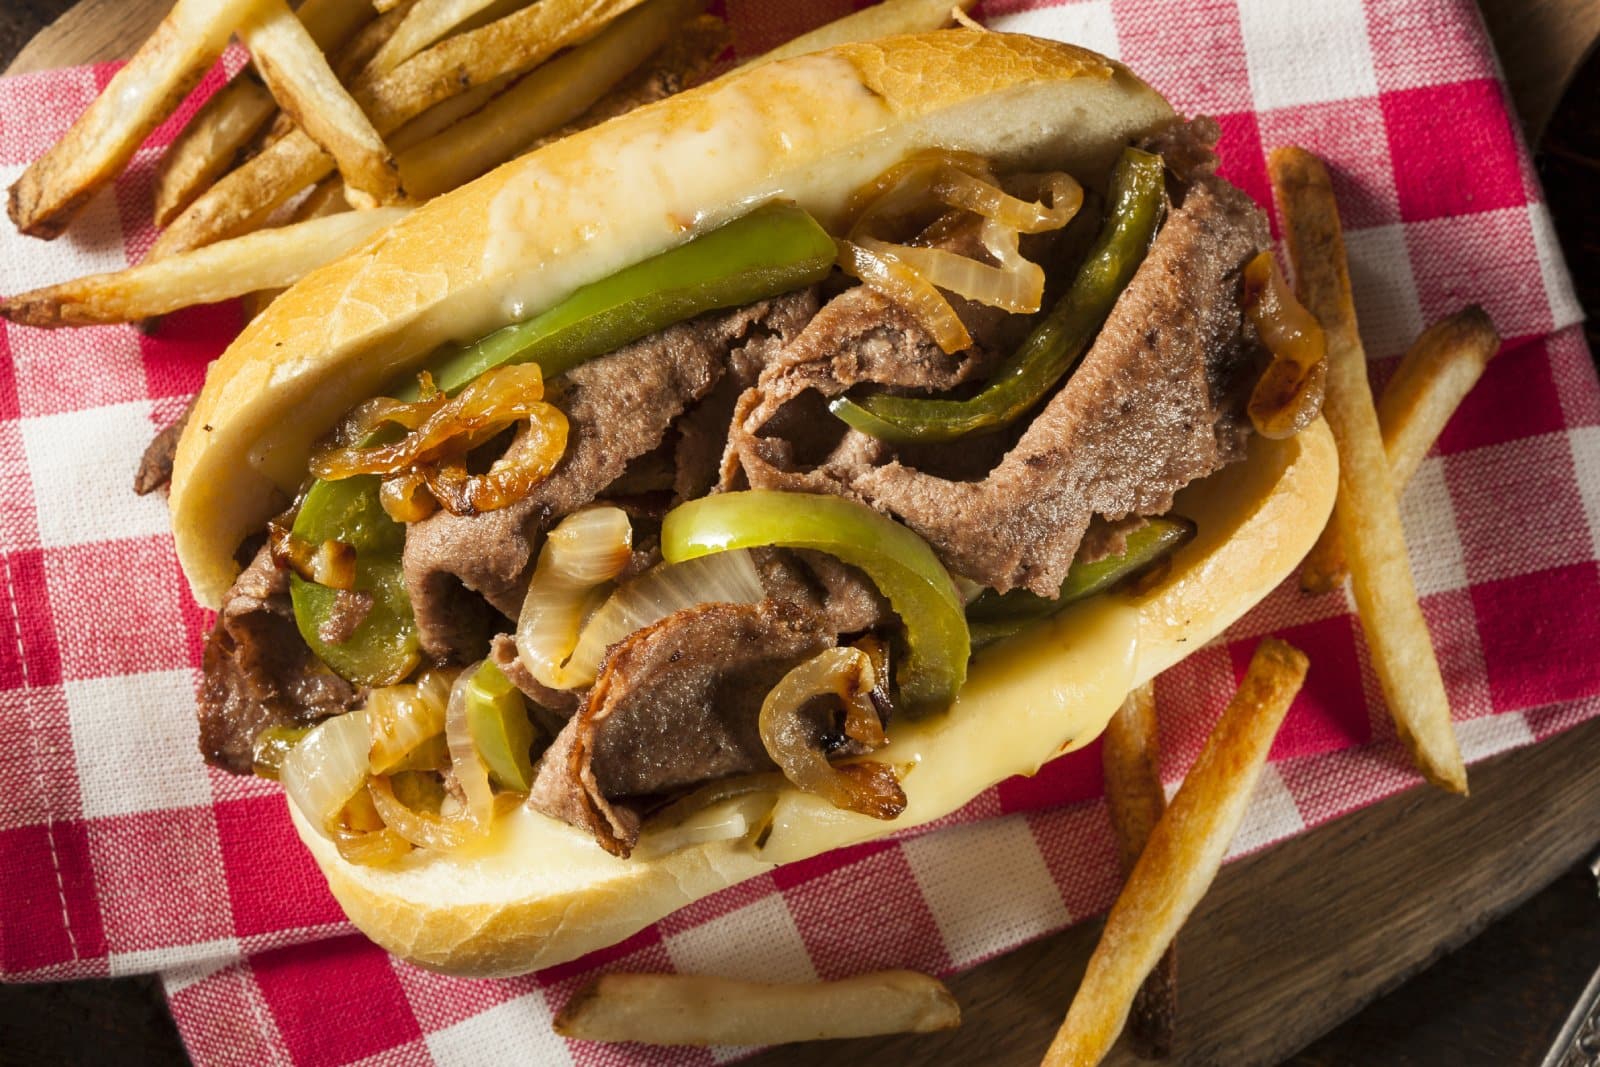 <p class="wp-caption-text">Image Credit: Shutterstock / Brent Hofacker</p>  <p>For an authentic Philly cheesesteak experience, expect to pay around $8 in Philadelphia. Outside of its home city, especially overseas, the price—and authenticity—can vary greatly, often reaching $12-$15.</p>